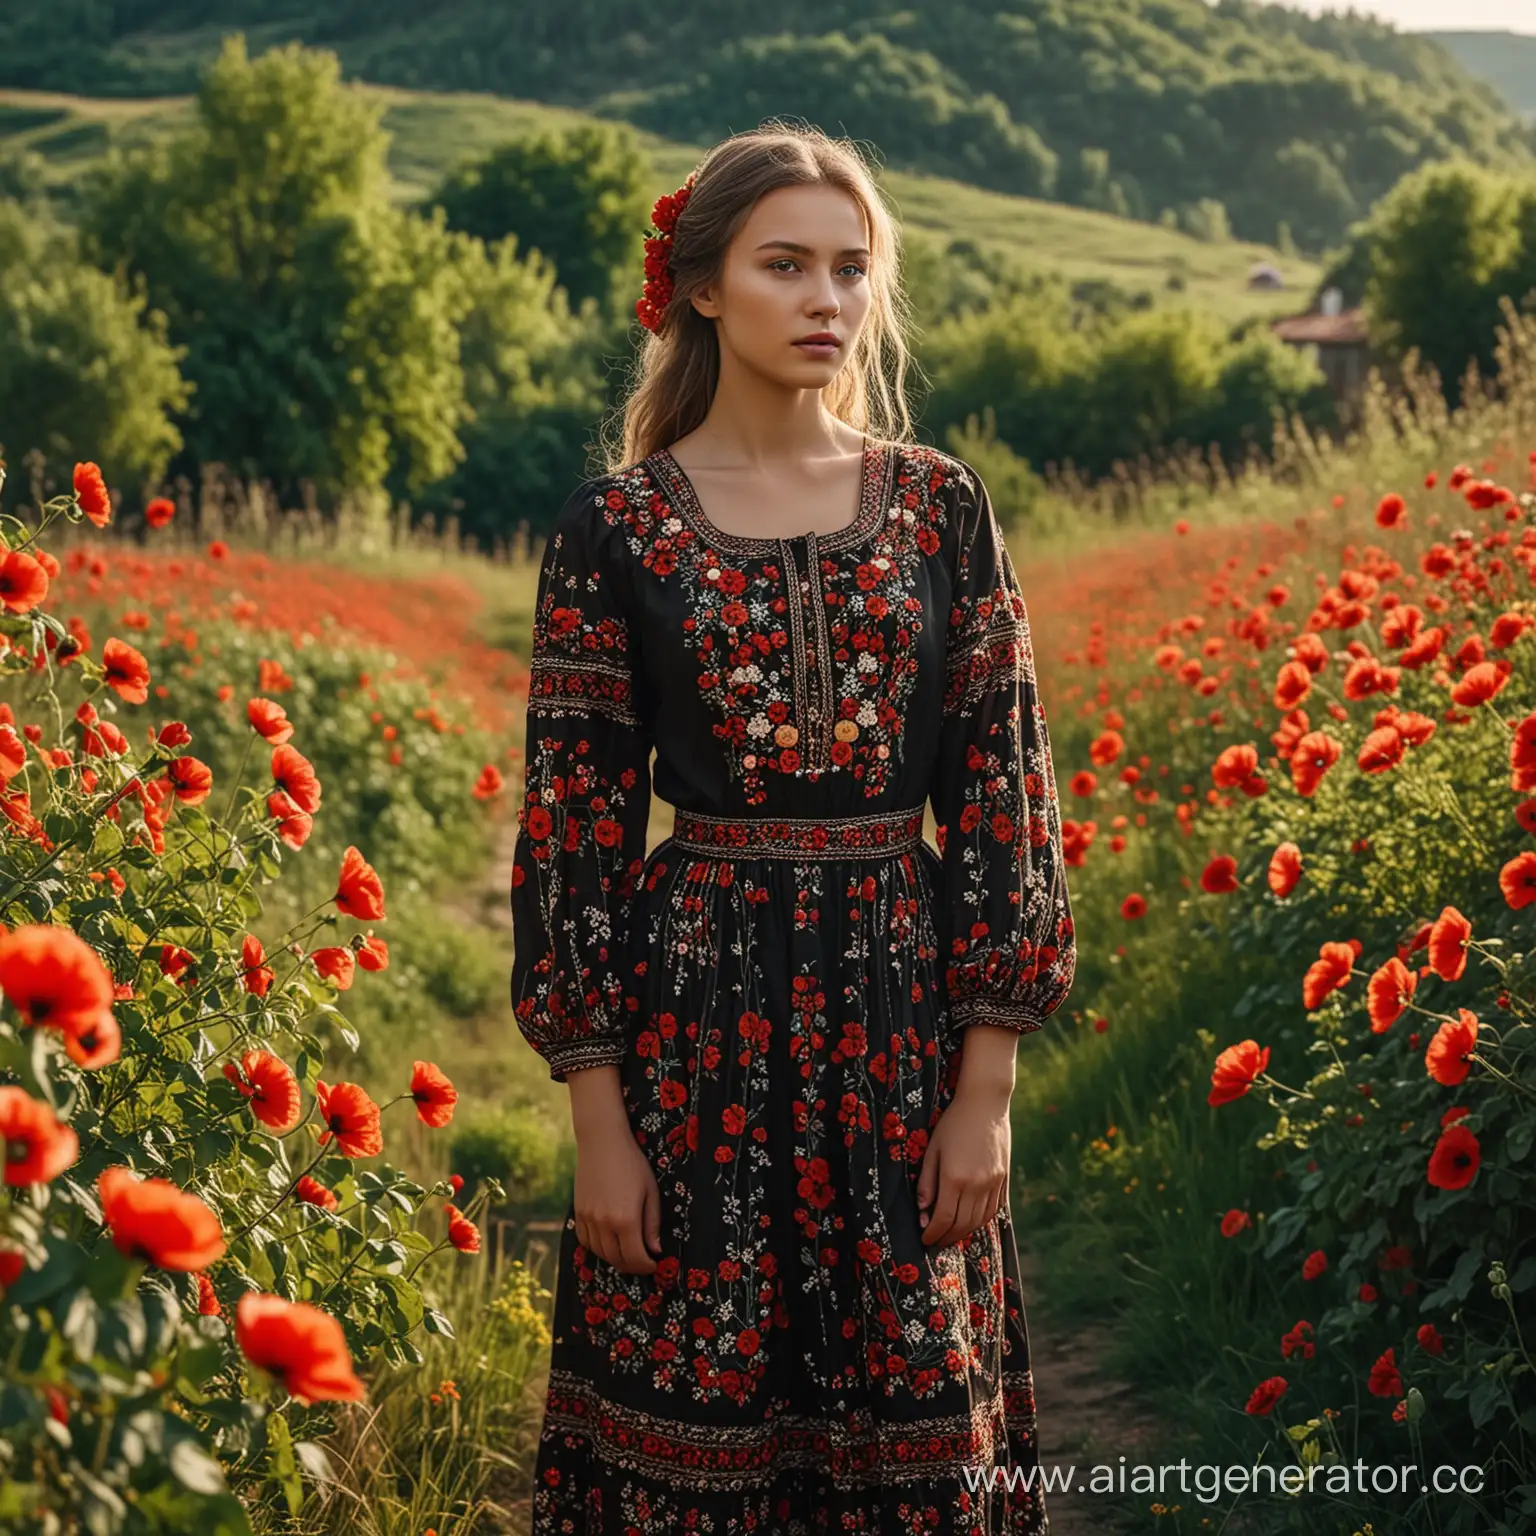 Cinematic, vivid photo of a full-length Ukrainian young girl in an embroidered dress. The background is a rural landscape, viburnum, poppies, which emphasizes the connection with nature and the land, and the lighting enhances the overall cinematic feel of the image., photo, cinematography.